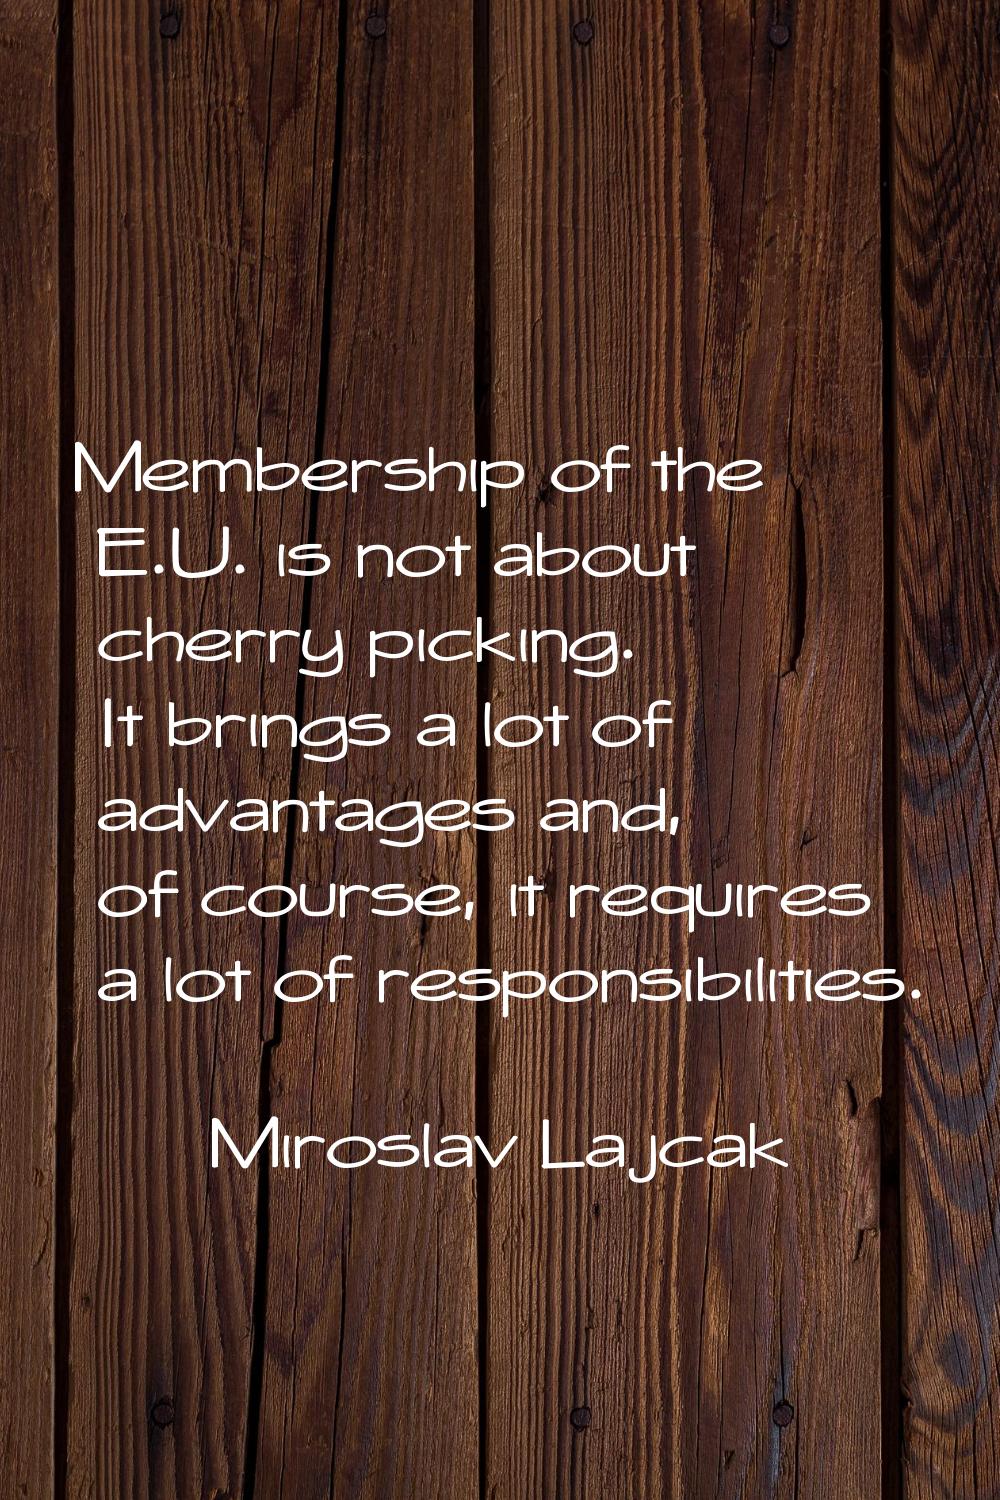 Membership of the E.U. is not about cherry picking. It brings a lot of advantages and, of course, i